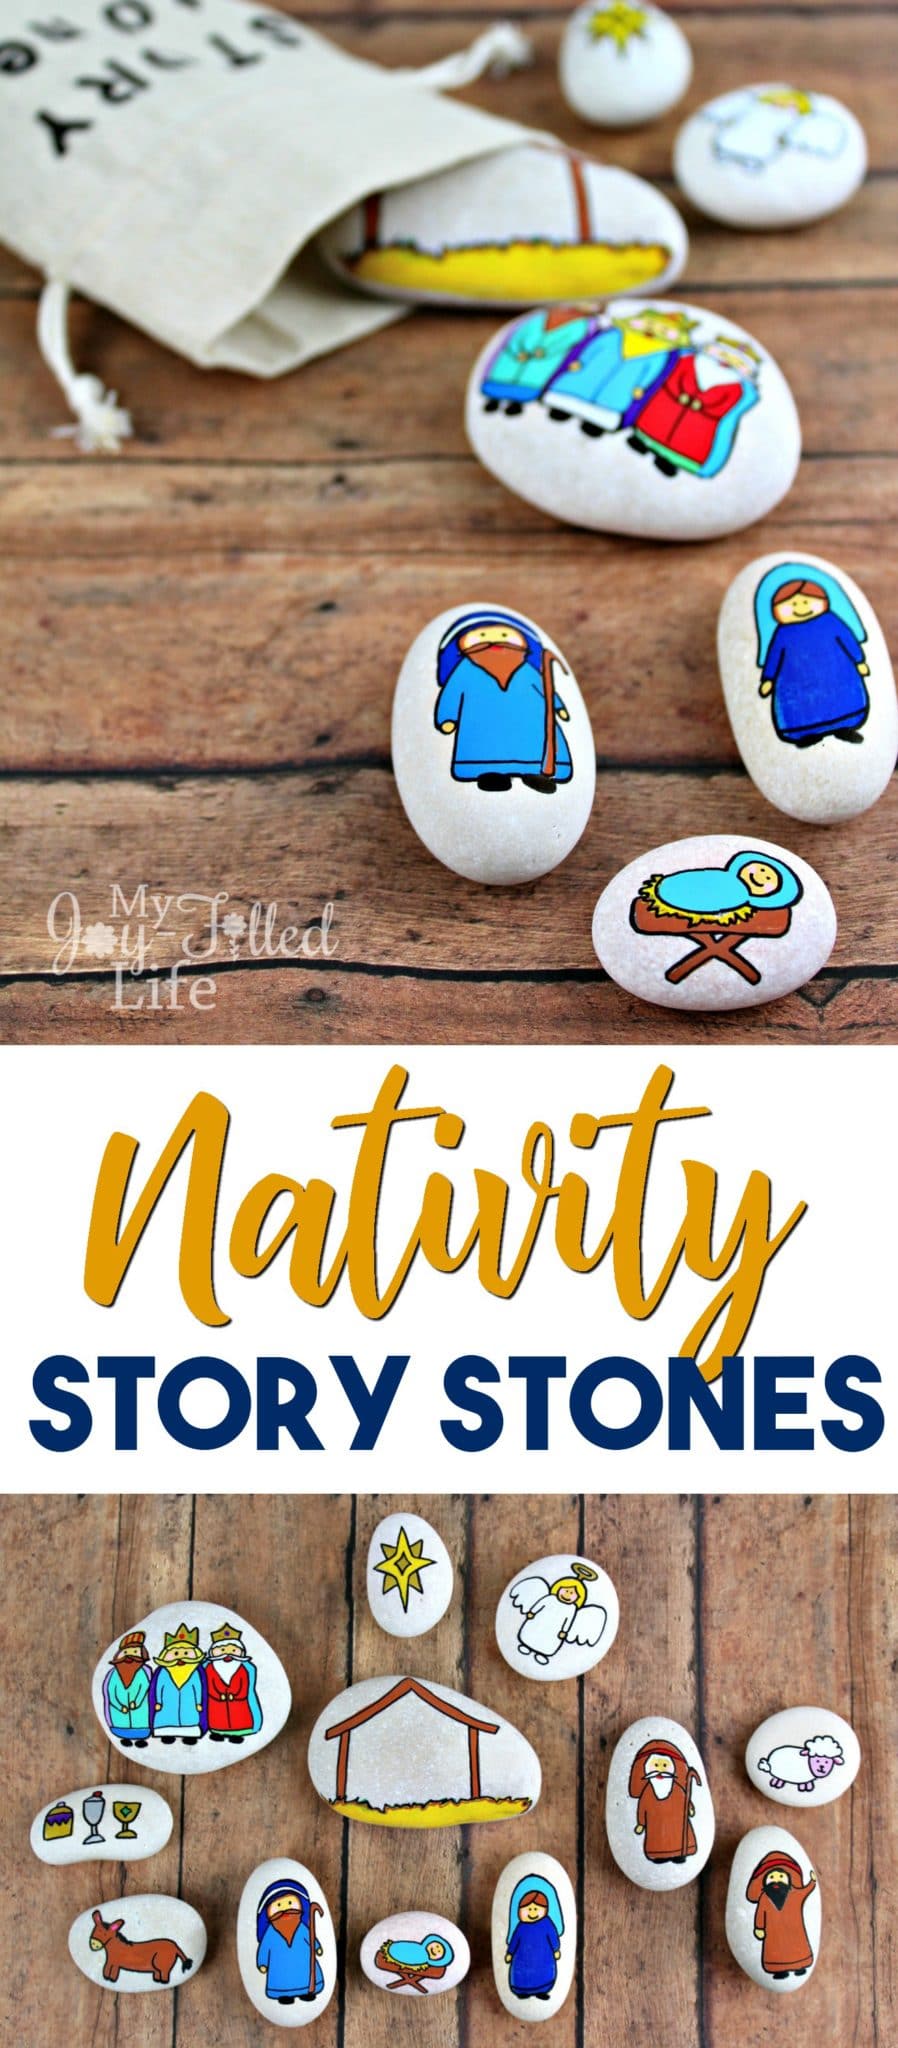 Nativity story stones help to keep Christ at the center of Christmas - use them as story props or as a simple nativity scene, or even as a gift.